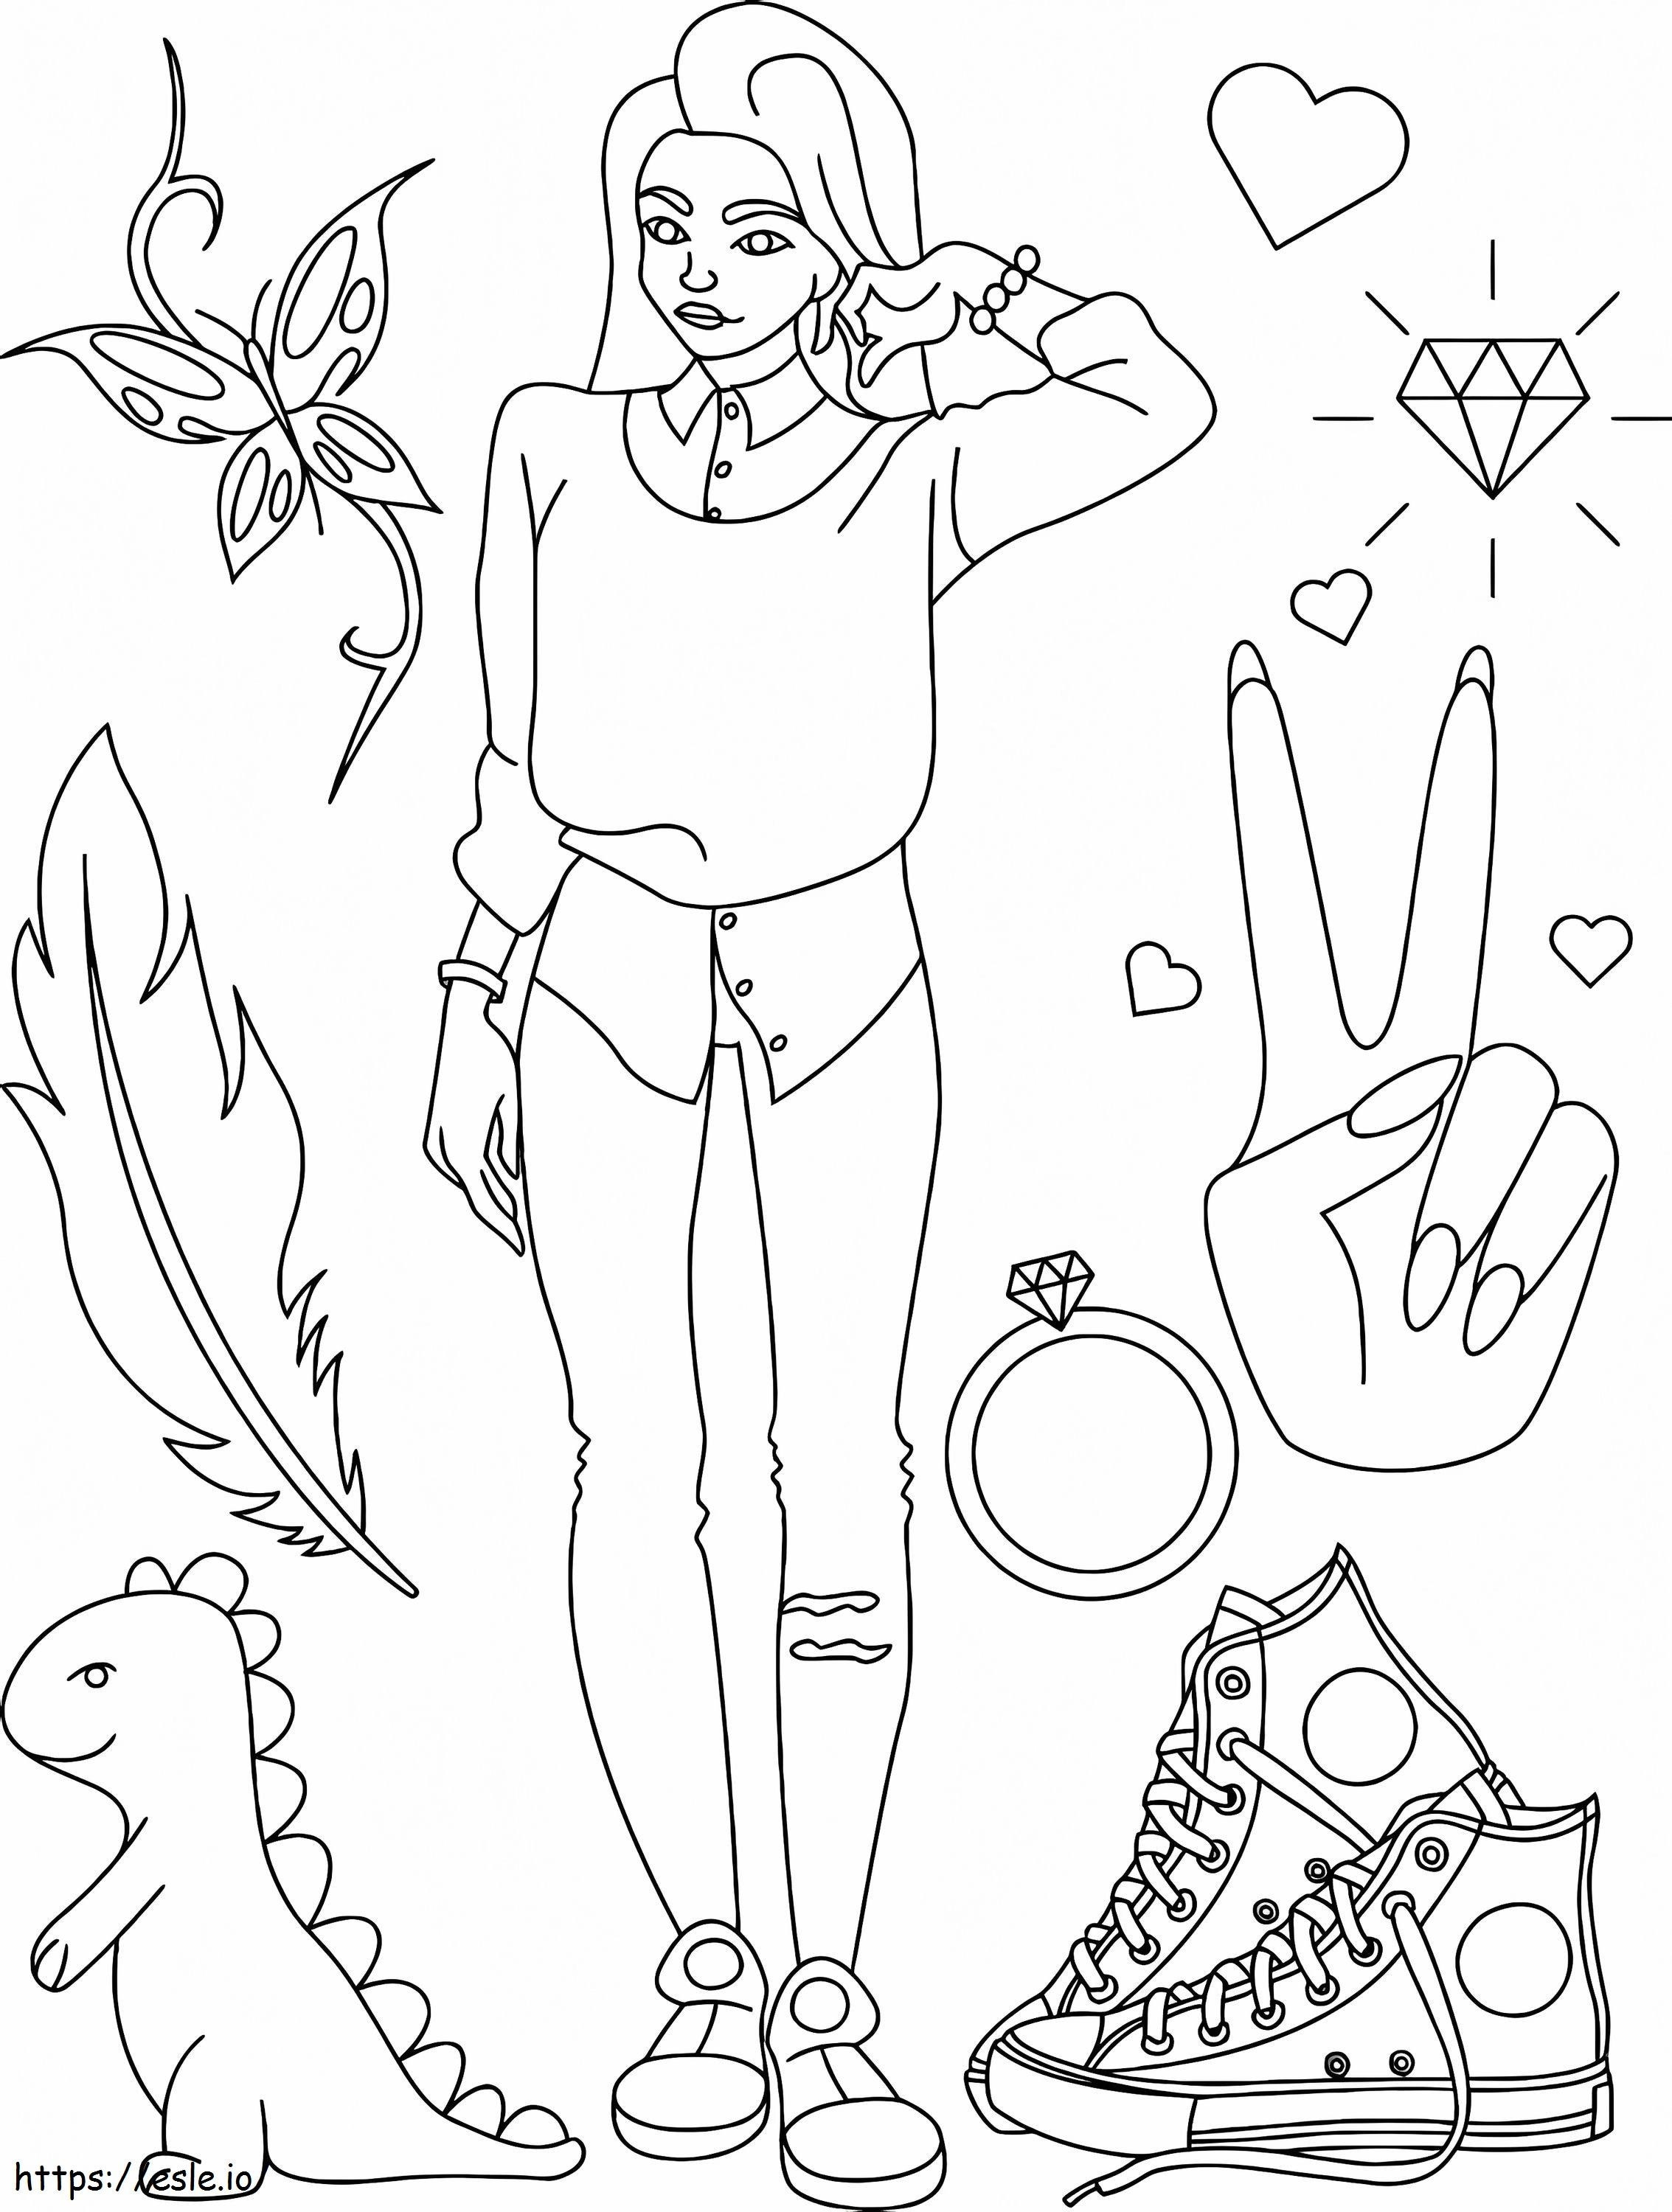 Fashionable Girl And Accessories coloring page